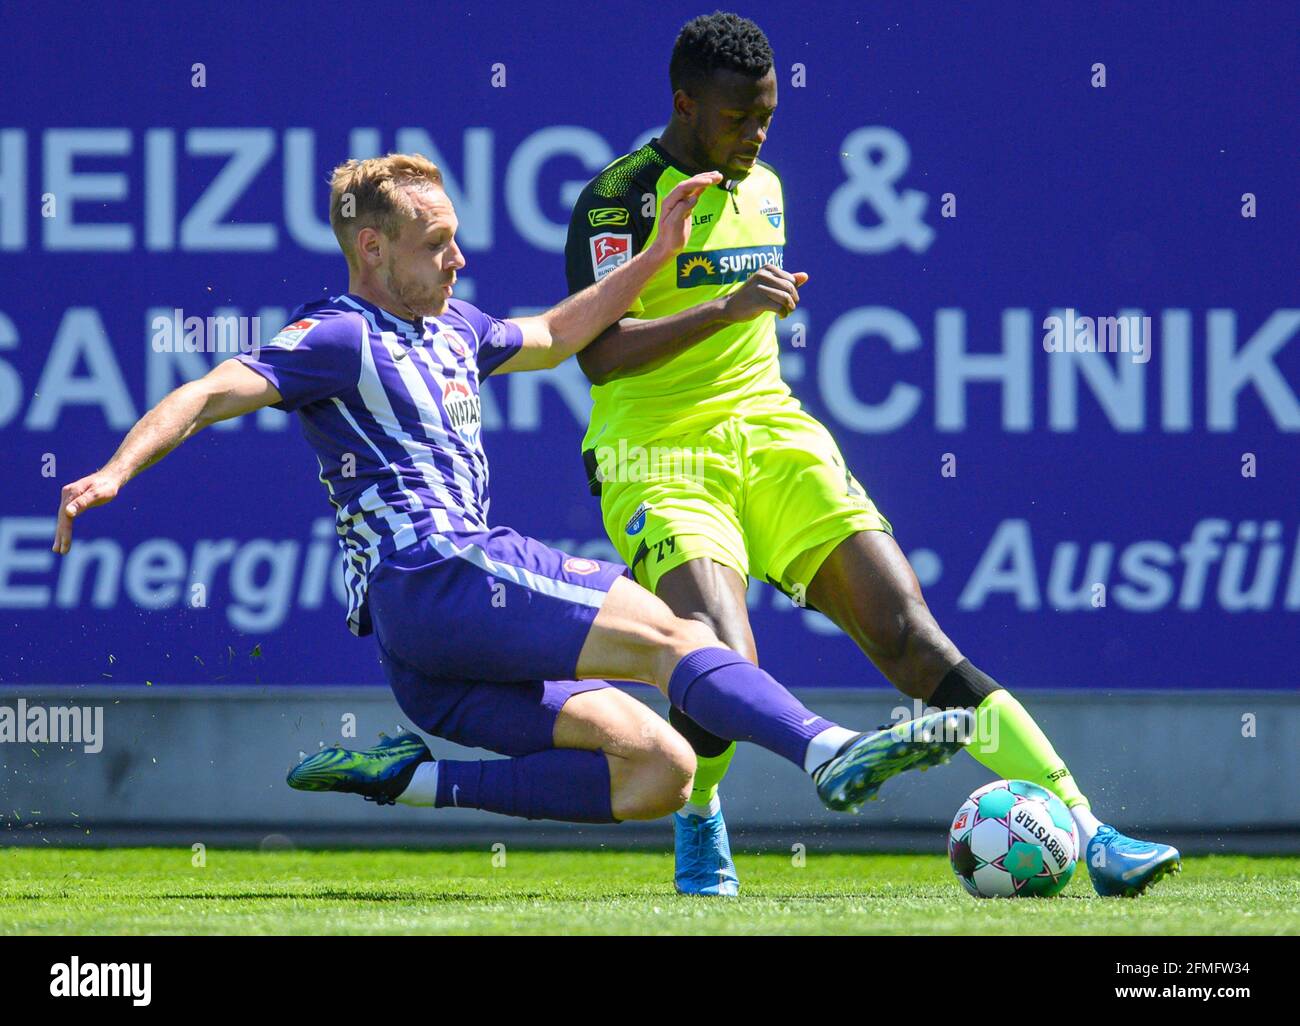 Aue, Germany. 09th May, 2021. Football: 2. Bundesliga, FC Erzgebirge Aue - SC Paderborn 07, Matchday 32, at Erzgebirgsstadion. Aue's Ben Zolinski (l) against Paderborn's Jamilu Collins. Credit: Robert Michael/dpa-Zentralbild/dpa - IMPORTANT NOTE: In accordance with the regulations of the DFL Deutsche Fußball Liga and/or the DFB Deutscher Fußball-Bund, it is prohibited to use or have used photographs taken in the stadium and/or of the match in the form of sequence pictures and/or video-like photo series./dpa/Alamy Live News Stock Photo